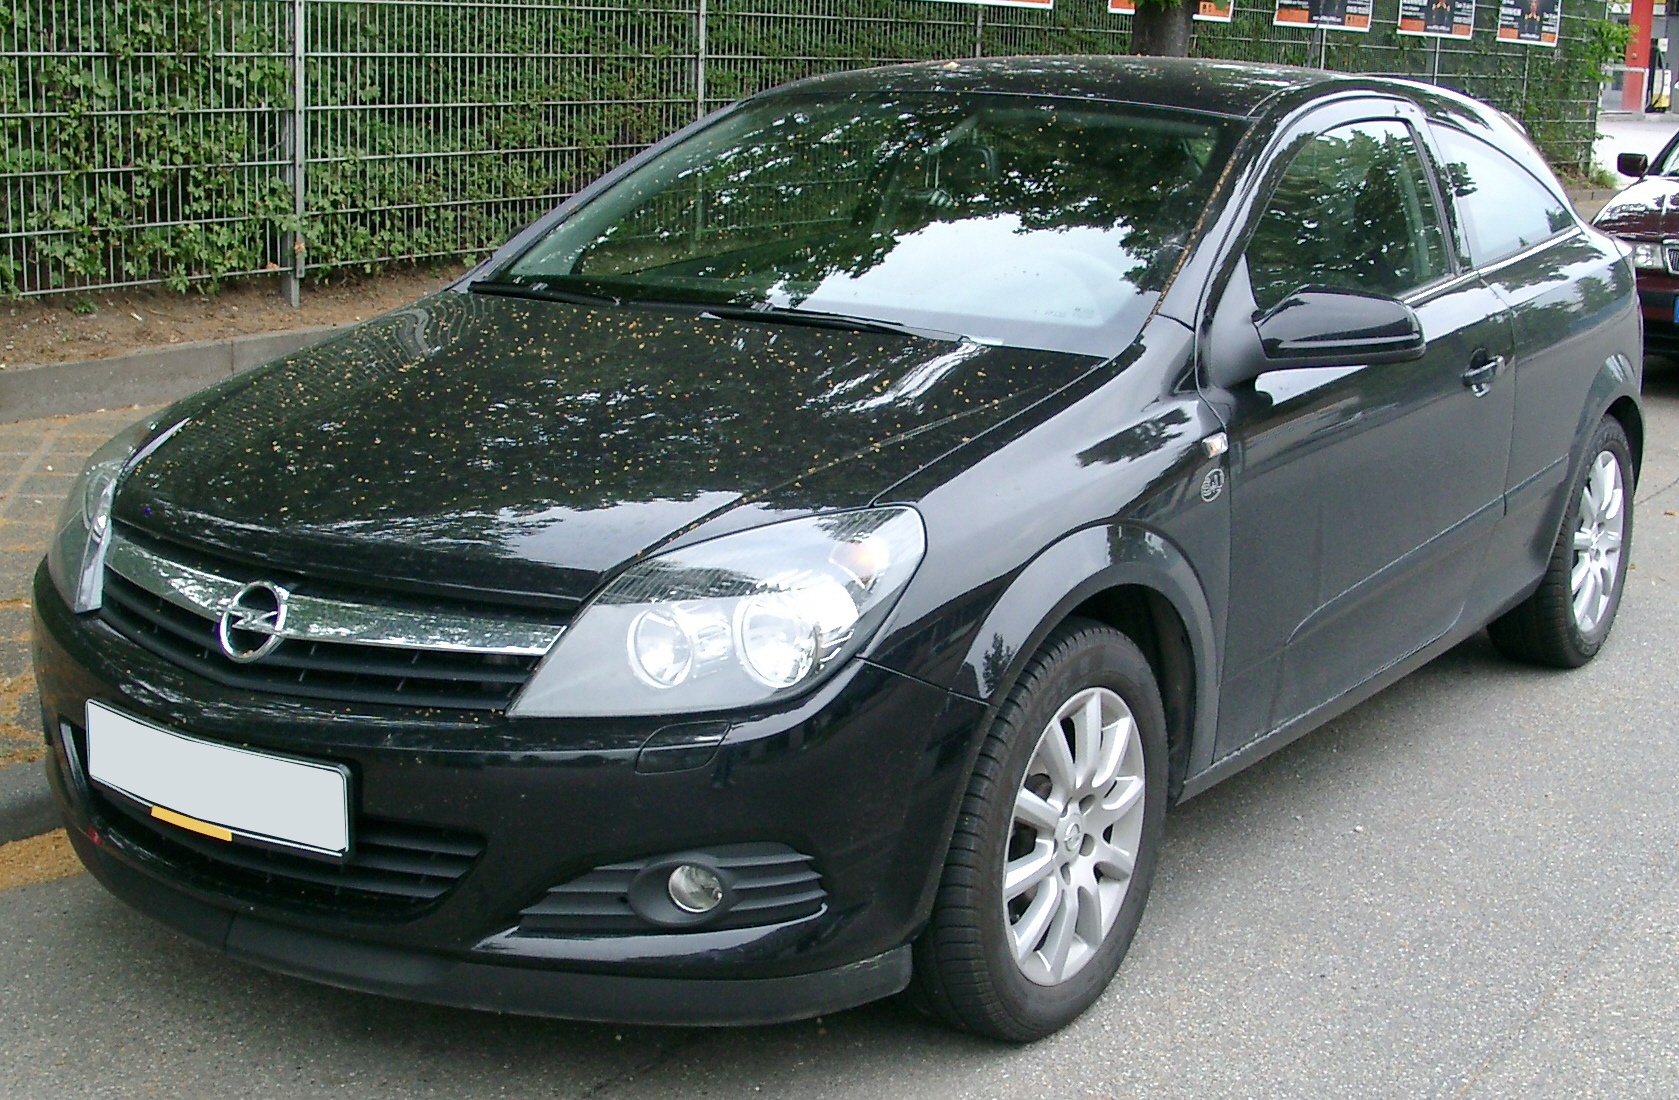 File:Opel Astra GTC front 20070609.jpg